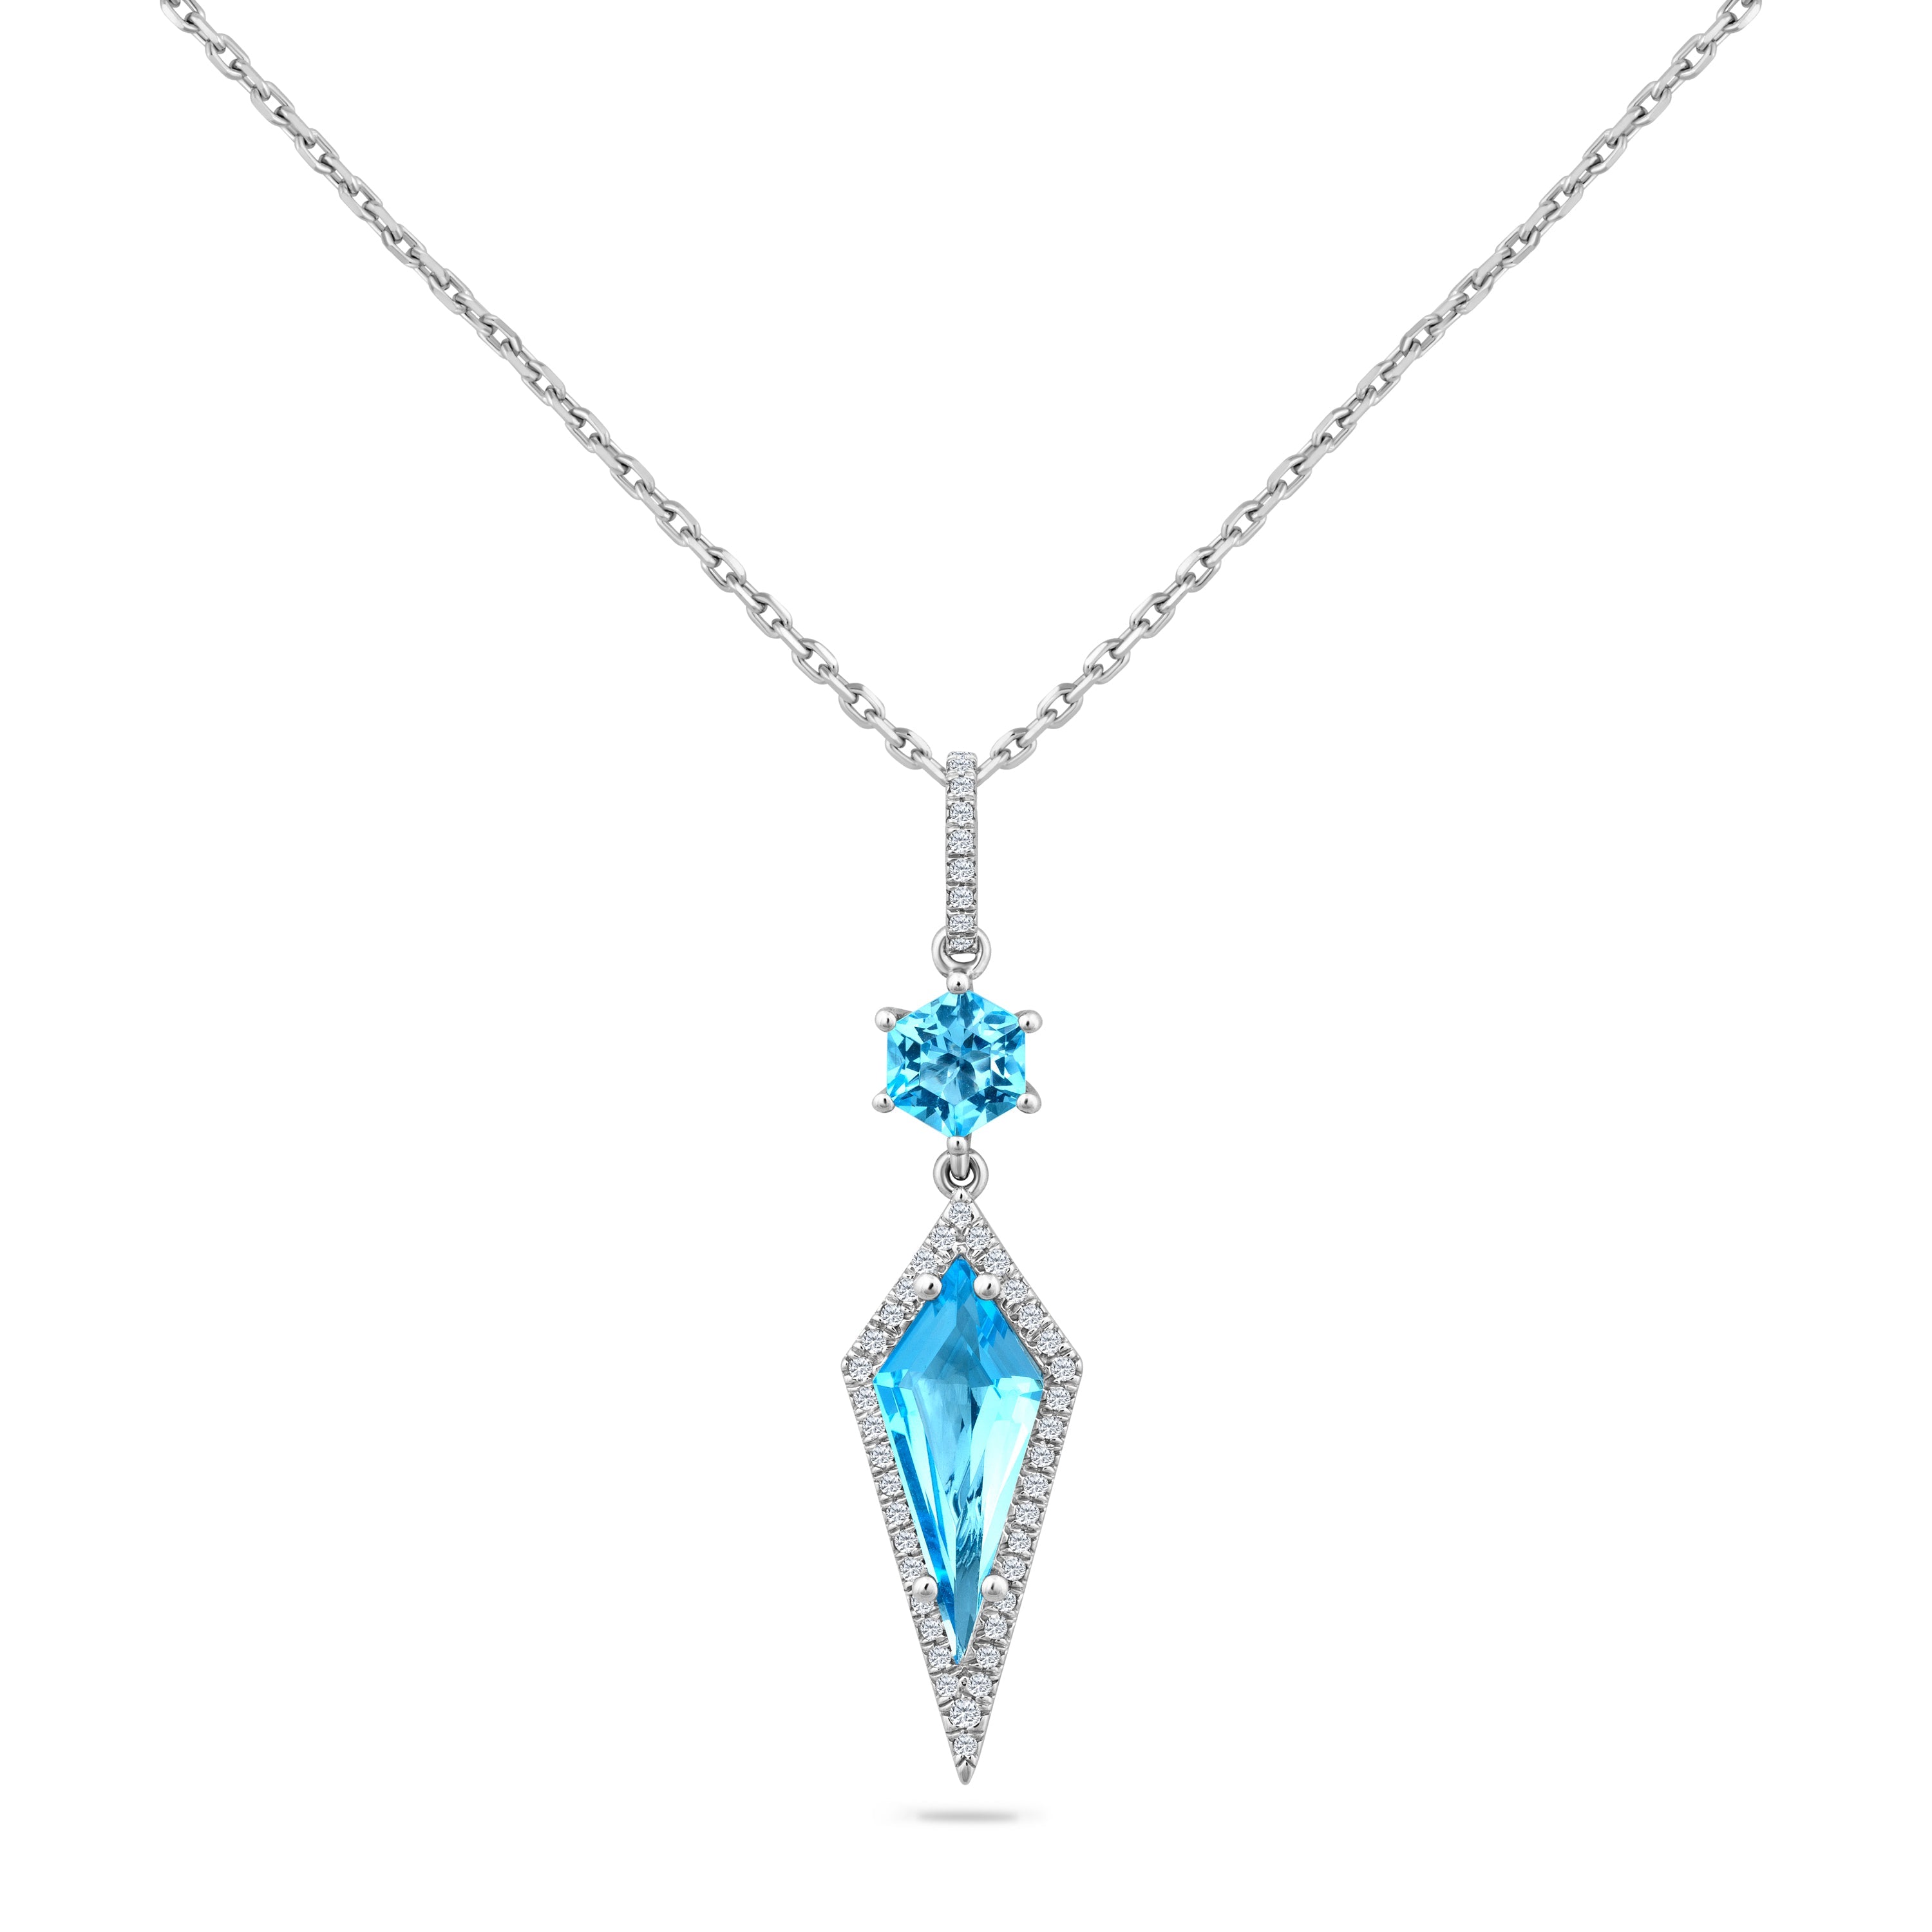 14KW PENDANT WITH 46 DIAMONDS 0.18CT & 2 BLUE TOPAZ 3.17CT ON 18 INCHES CABLE CHAIN